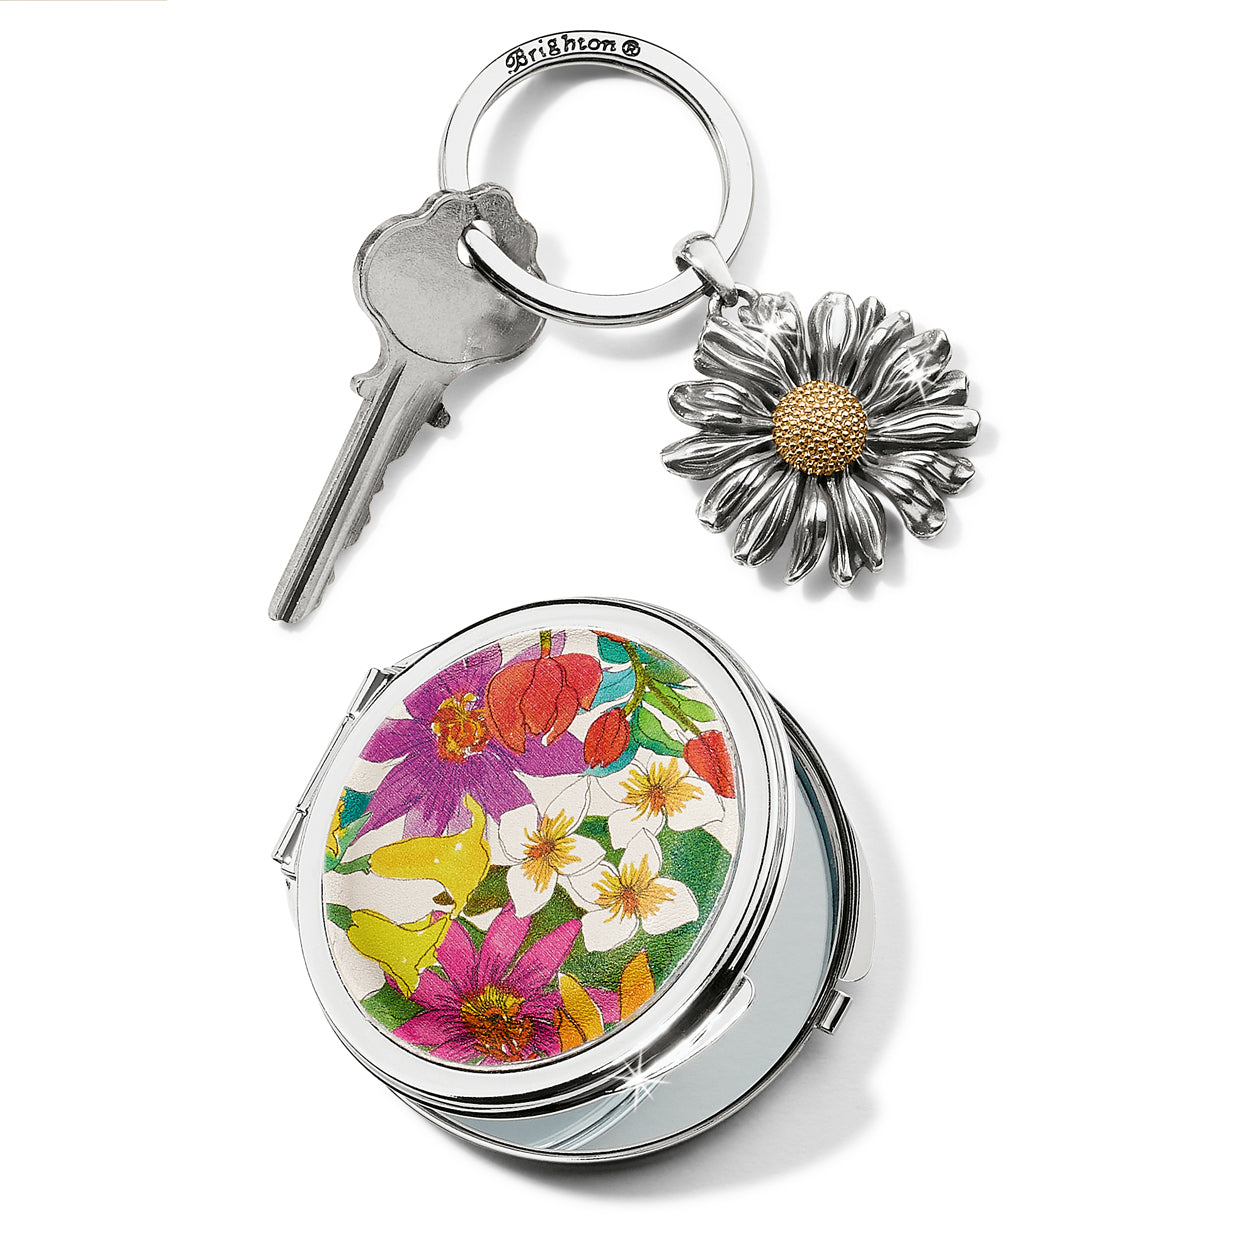 Floral key fob and compact mirror